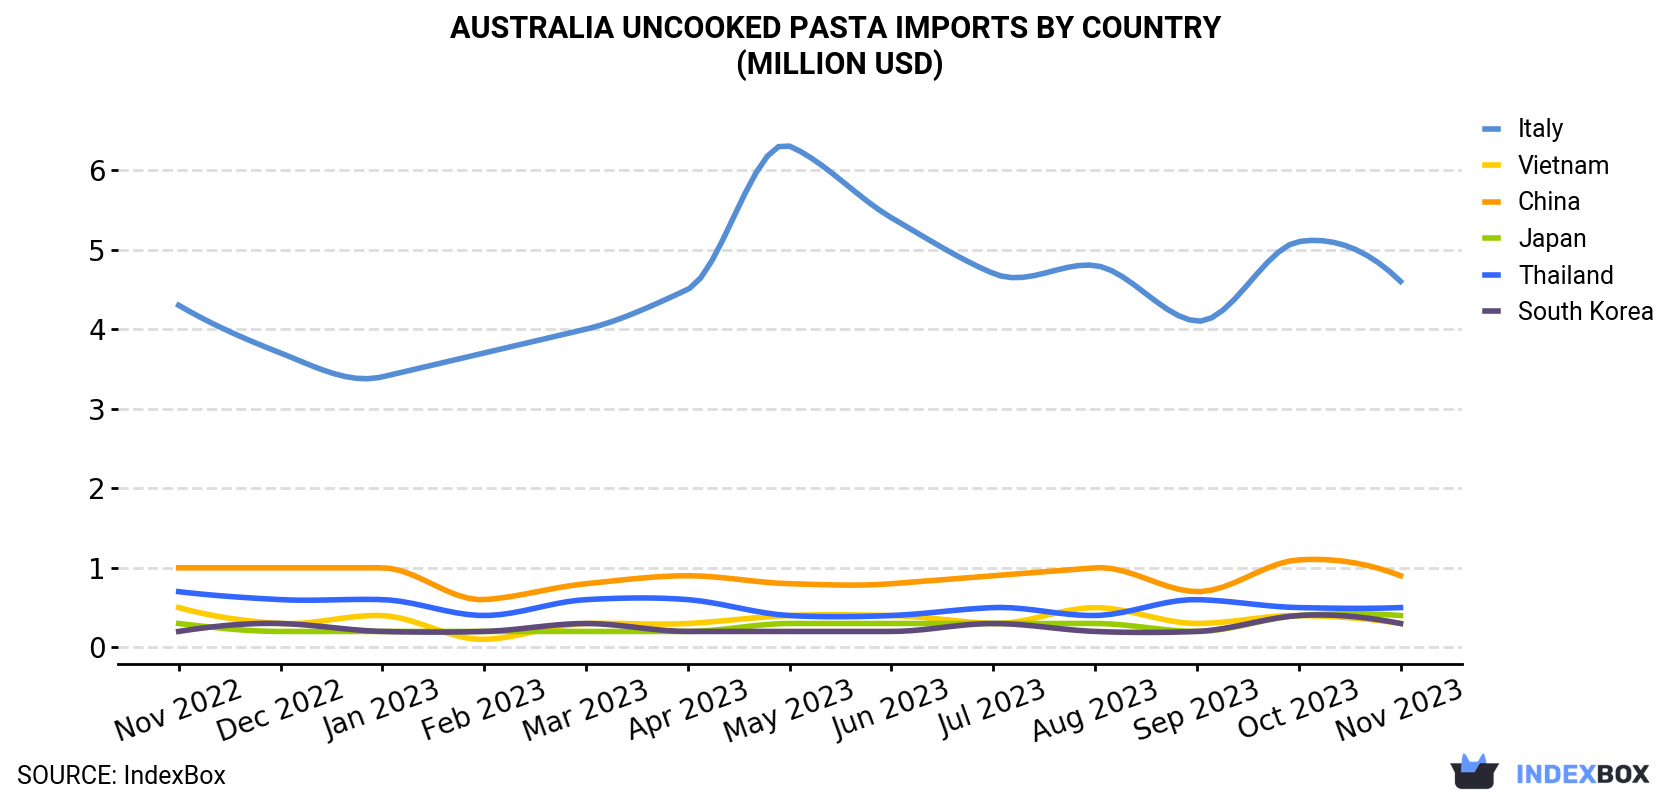 Australia Uncooked Pasta Imports By Country (Million USD)